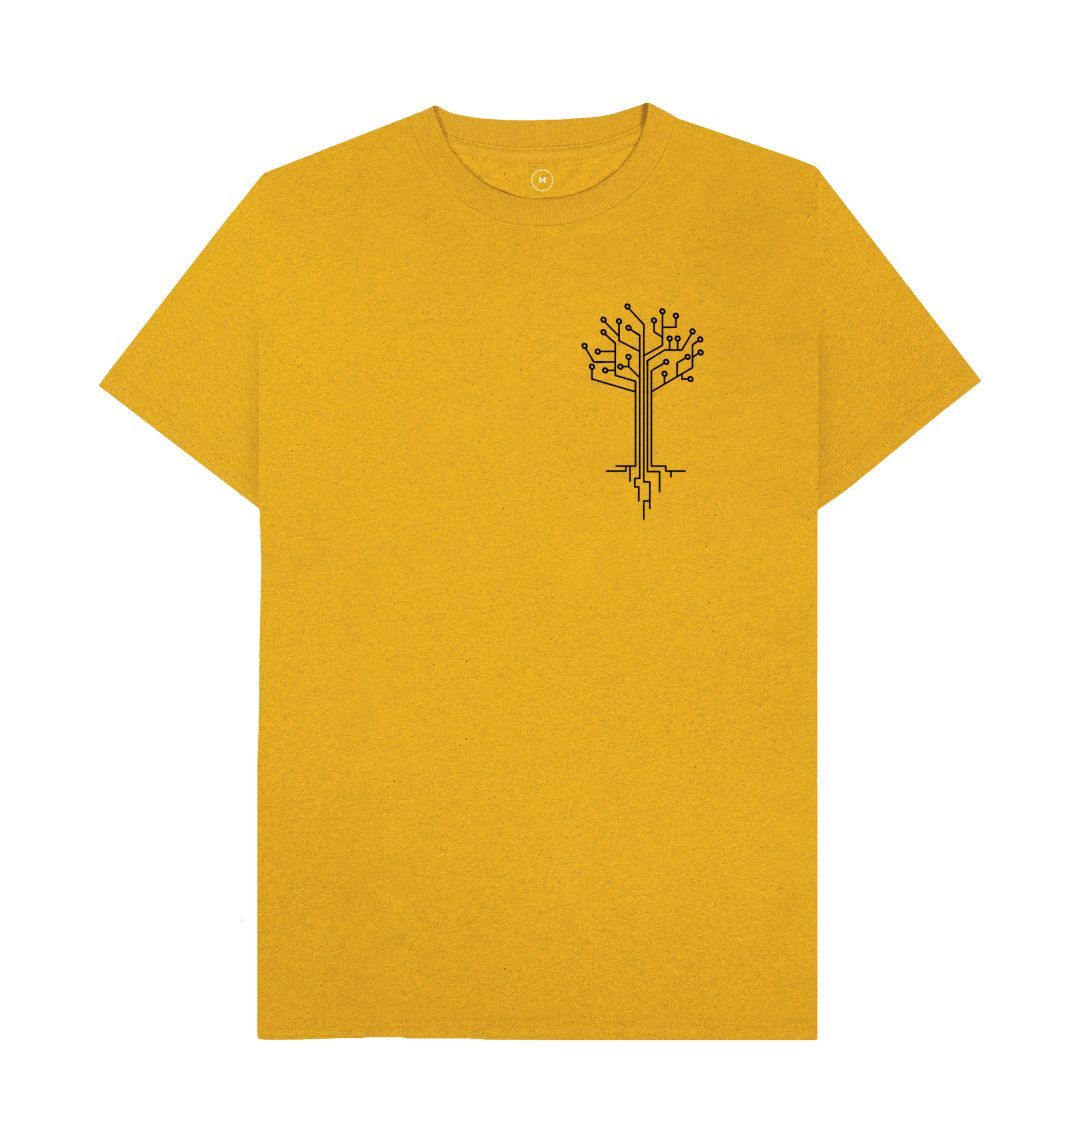 Goldenrod Do Nature Sentient Beauty Fashions Recycled Printed T-Shirt